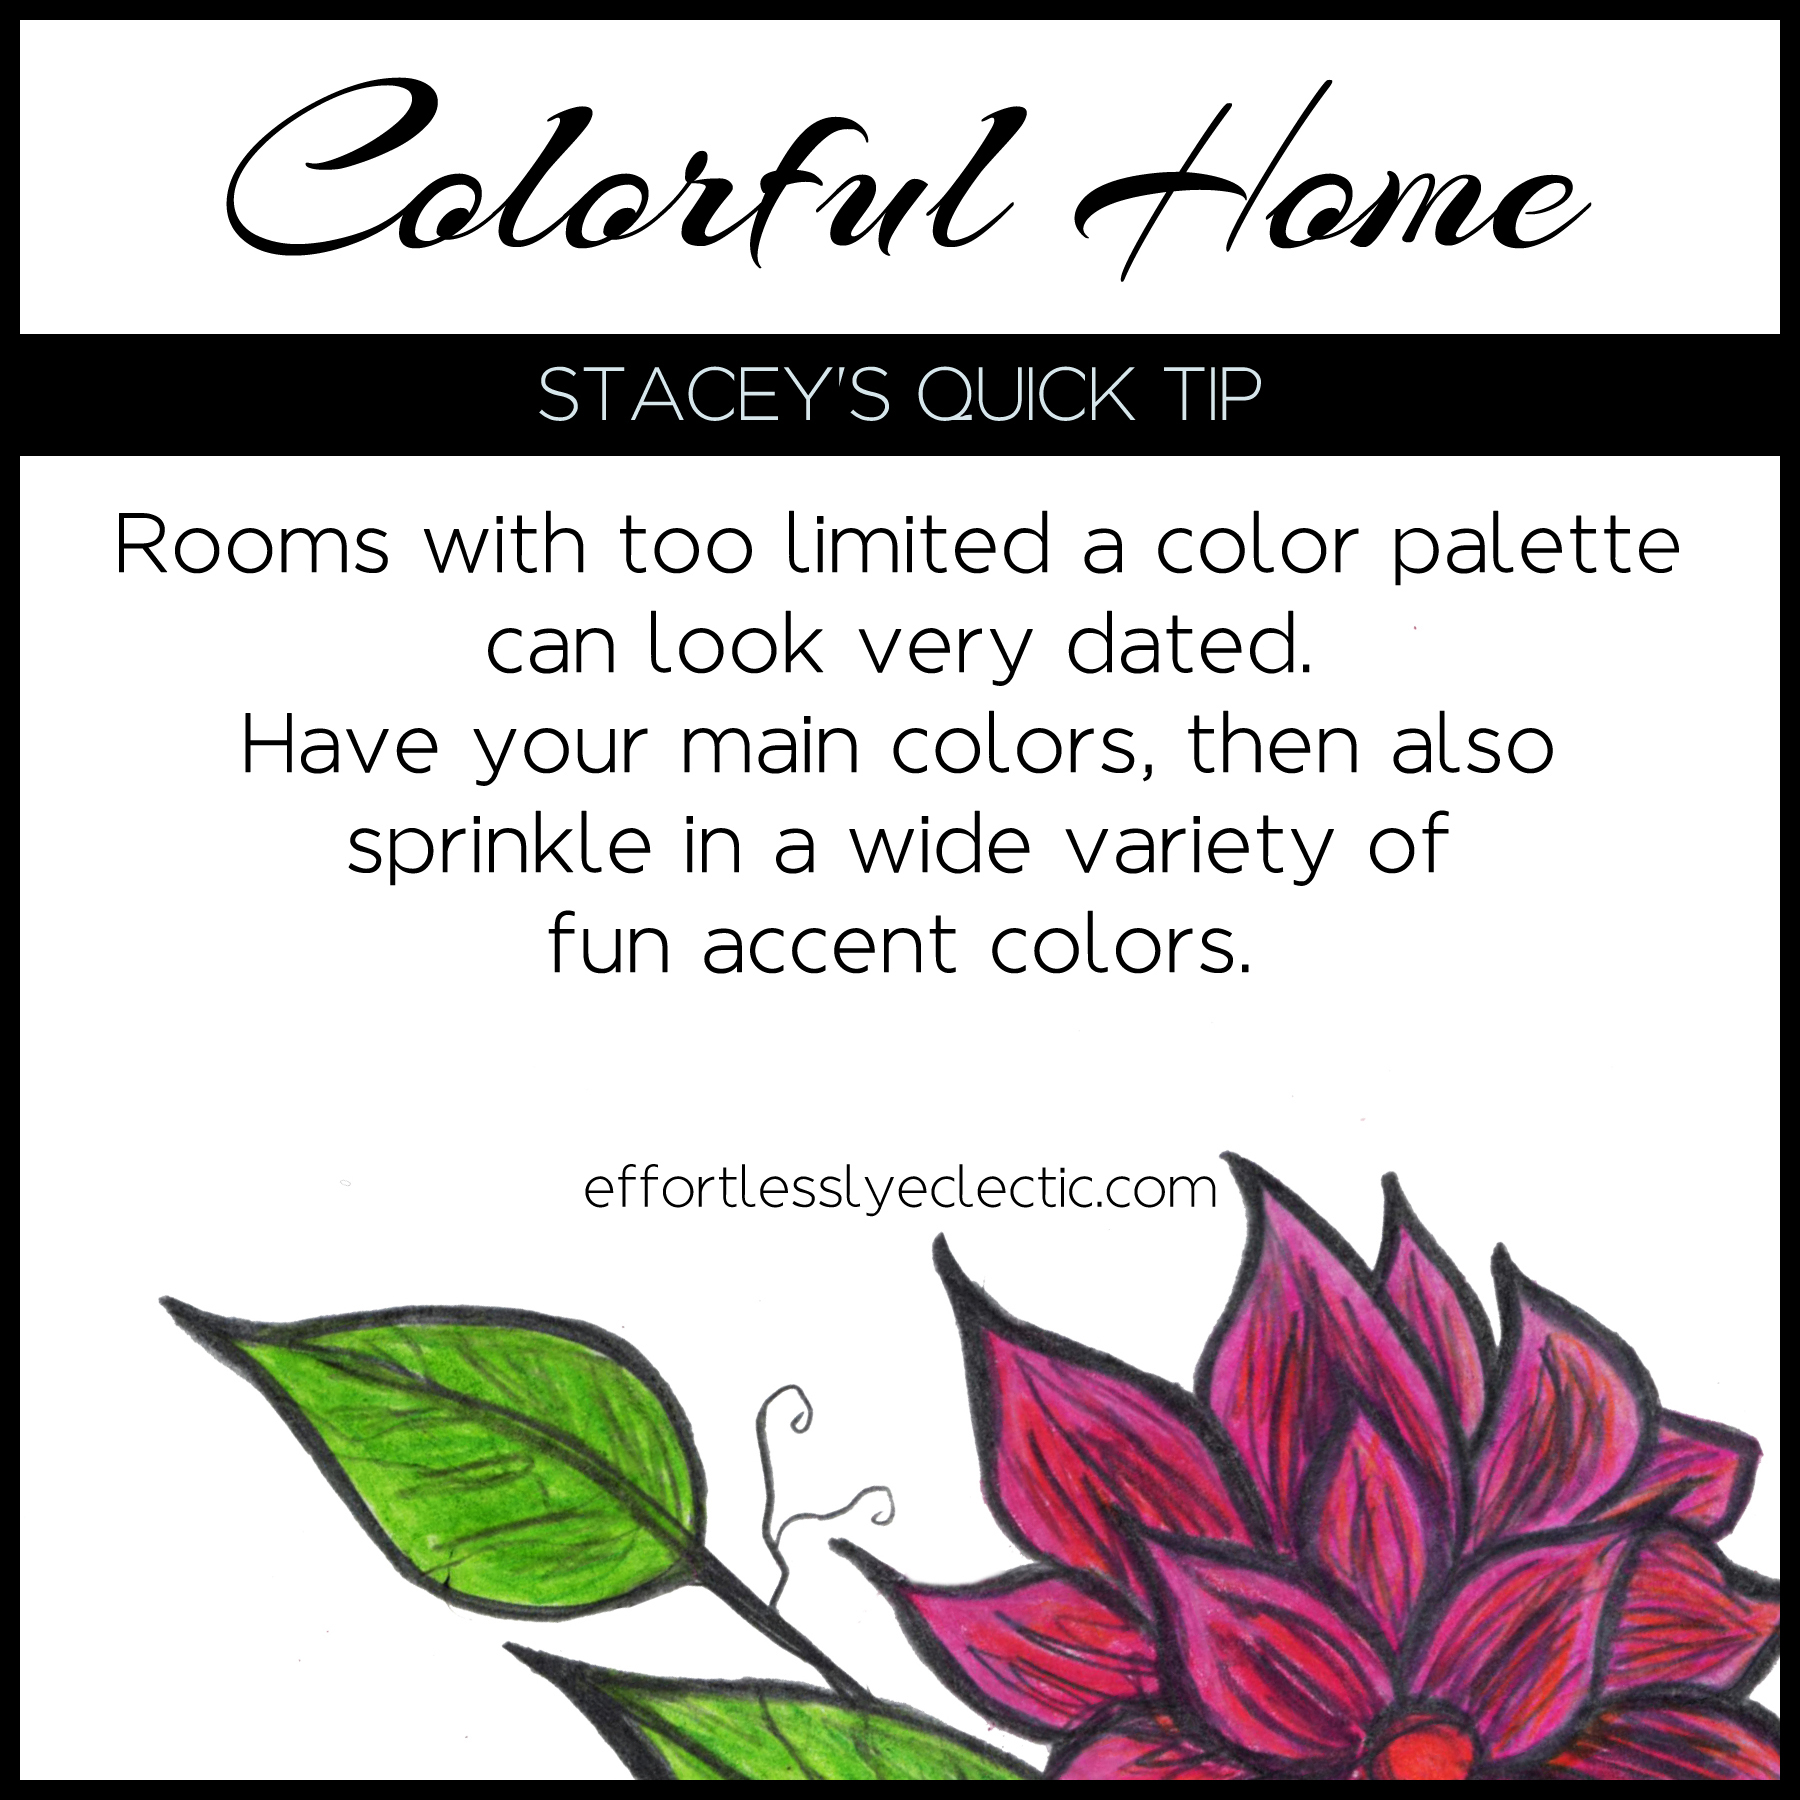 Colorful Home - A home decorating tip about how to add color to your home